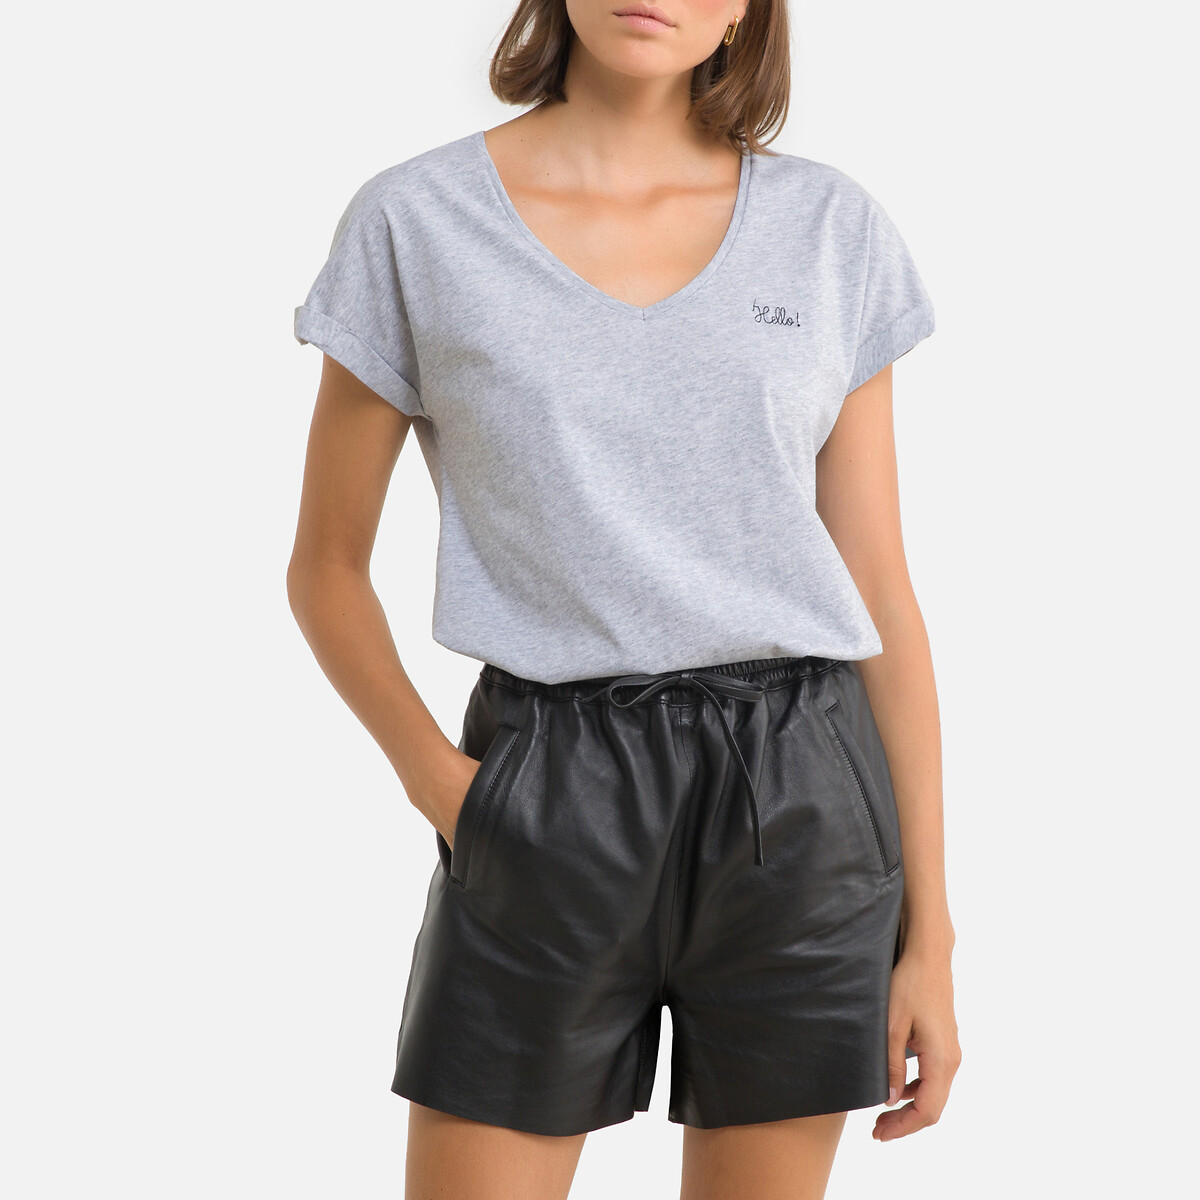 Cotton V-Neck T-Shirt with Long Sleeves